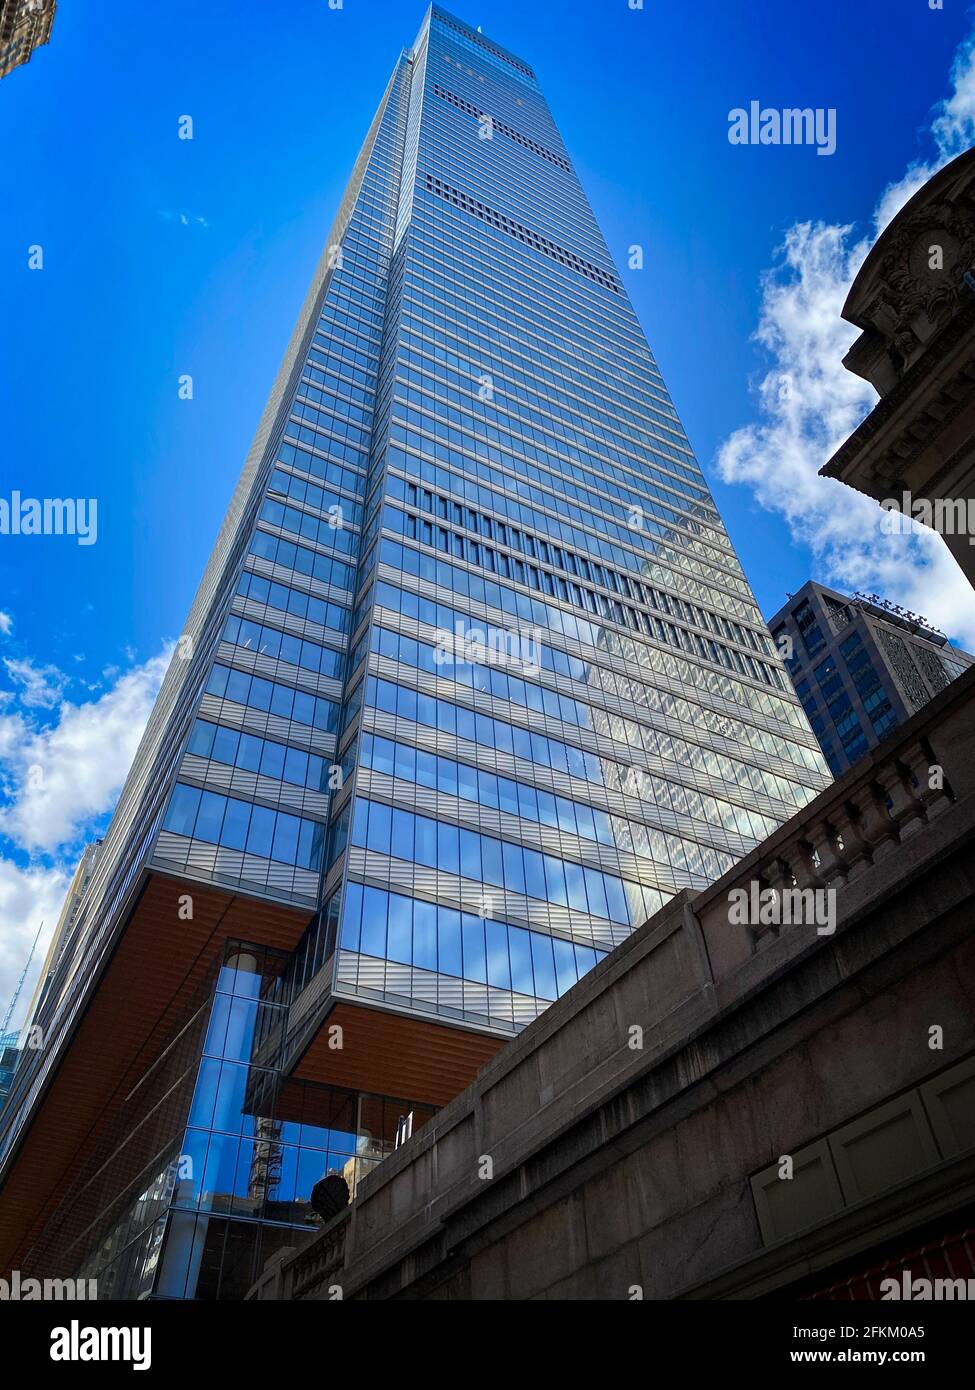 New York, NY, USA - May 3, 2021: The new Ritz-Carlton luxury hotel in the NoMad neighborhood at 28th and Broadway Stock Photo